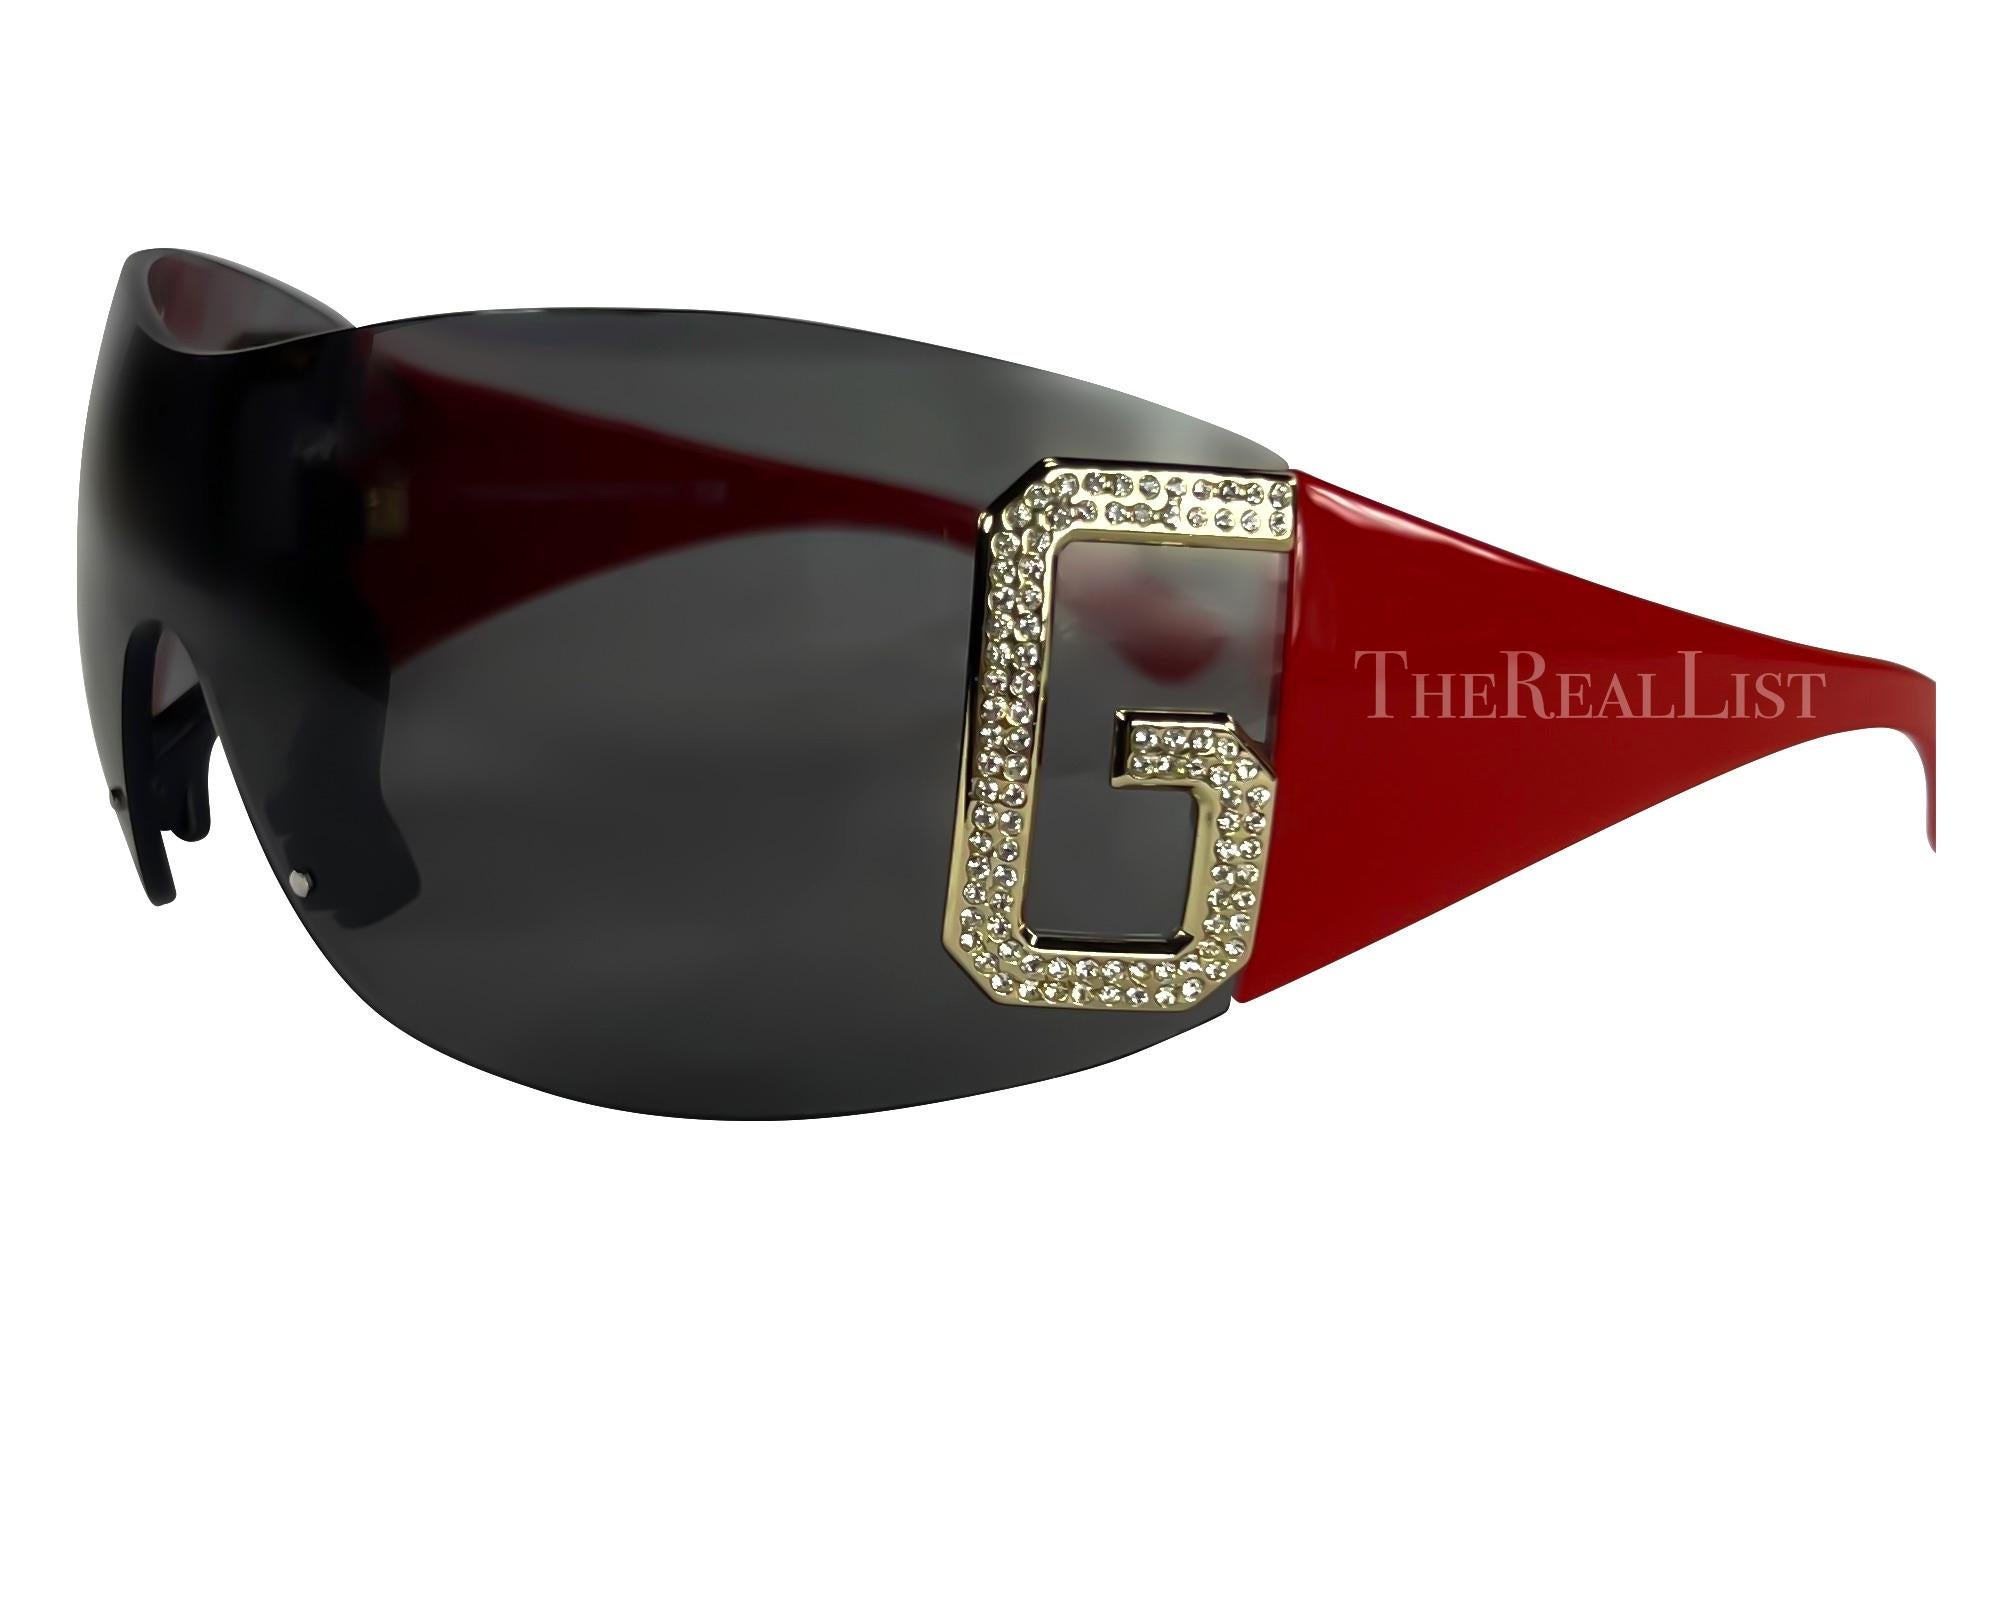 Presenting a pair of red Dolce & Gabbana sunglasses. From the early 2000s, these oversized rimless sunglasses exude a sense of boldness and confidence. The large silver-tone rhinestone-covered 'D' and 'G' logos on either side of the frames add a